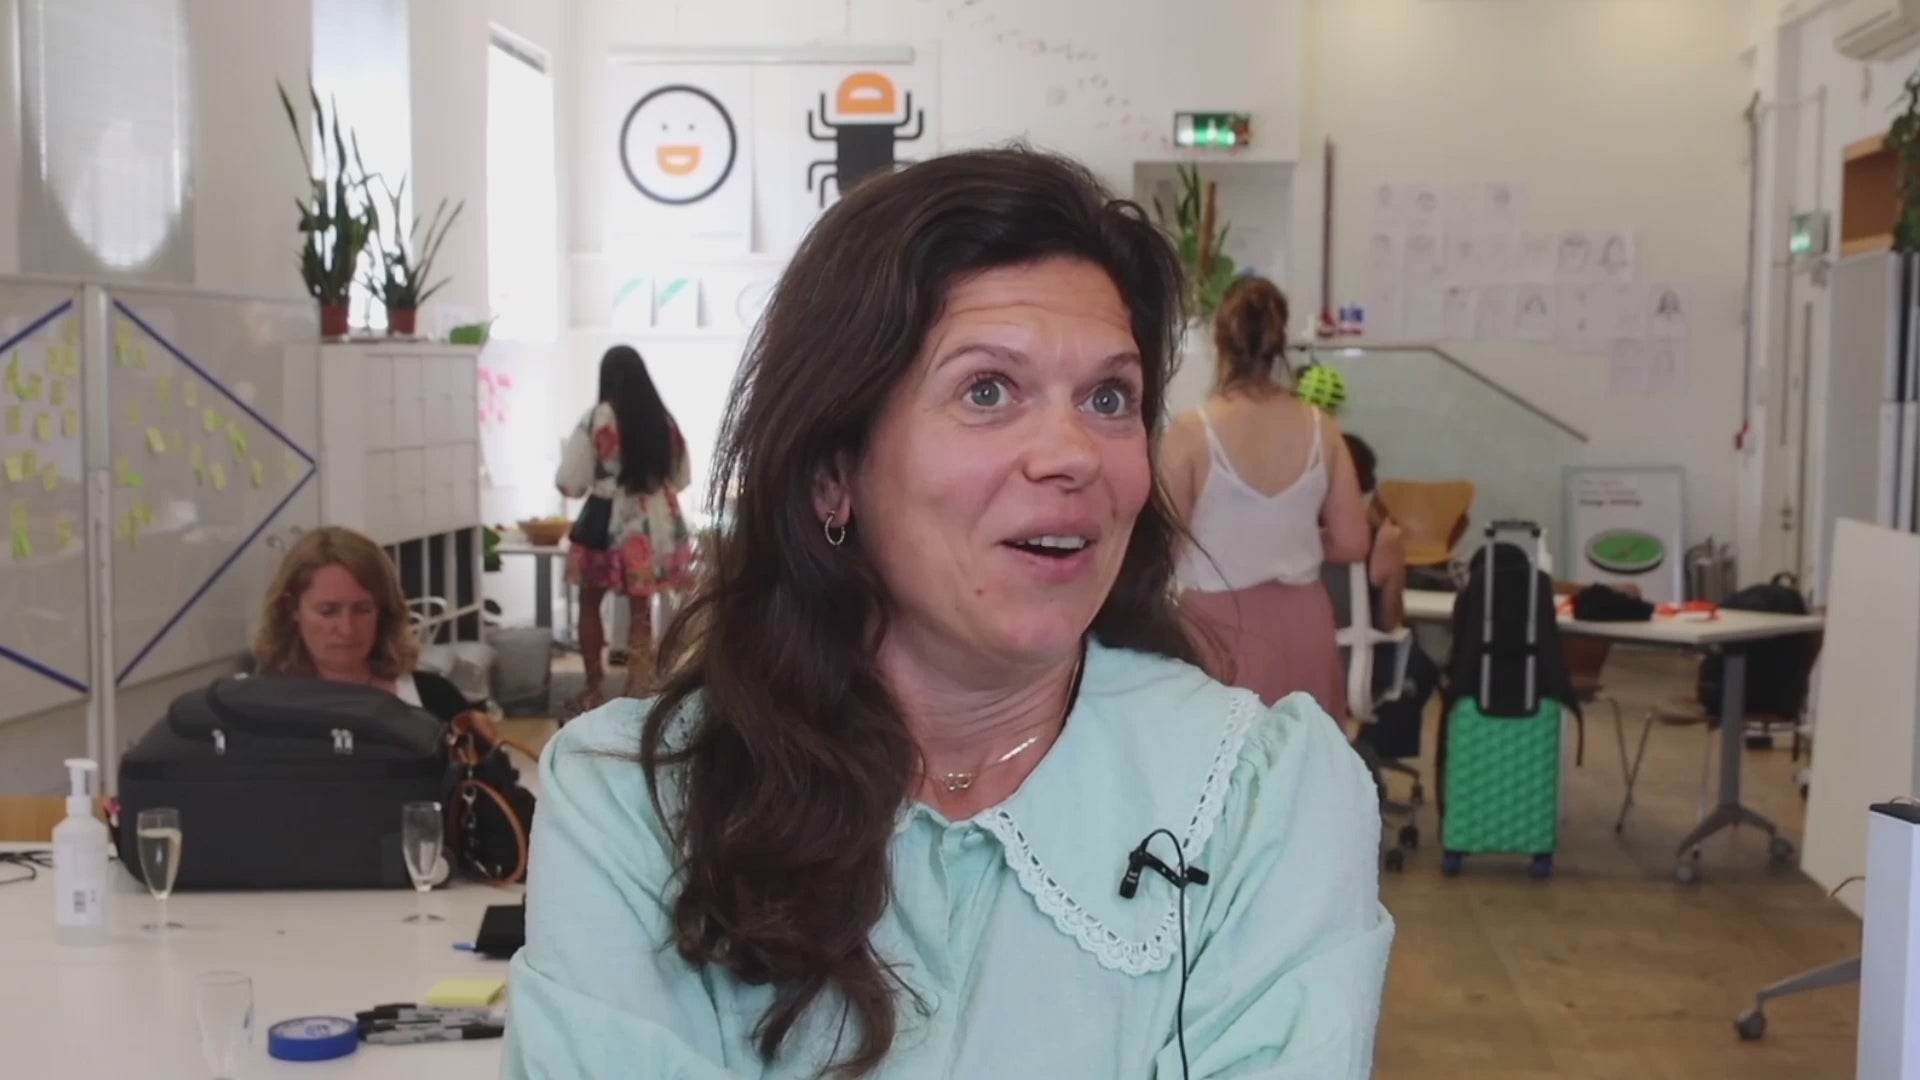 Short video intro featuring participants in one of our Design Thinkers Bootcamp courses